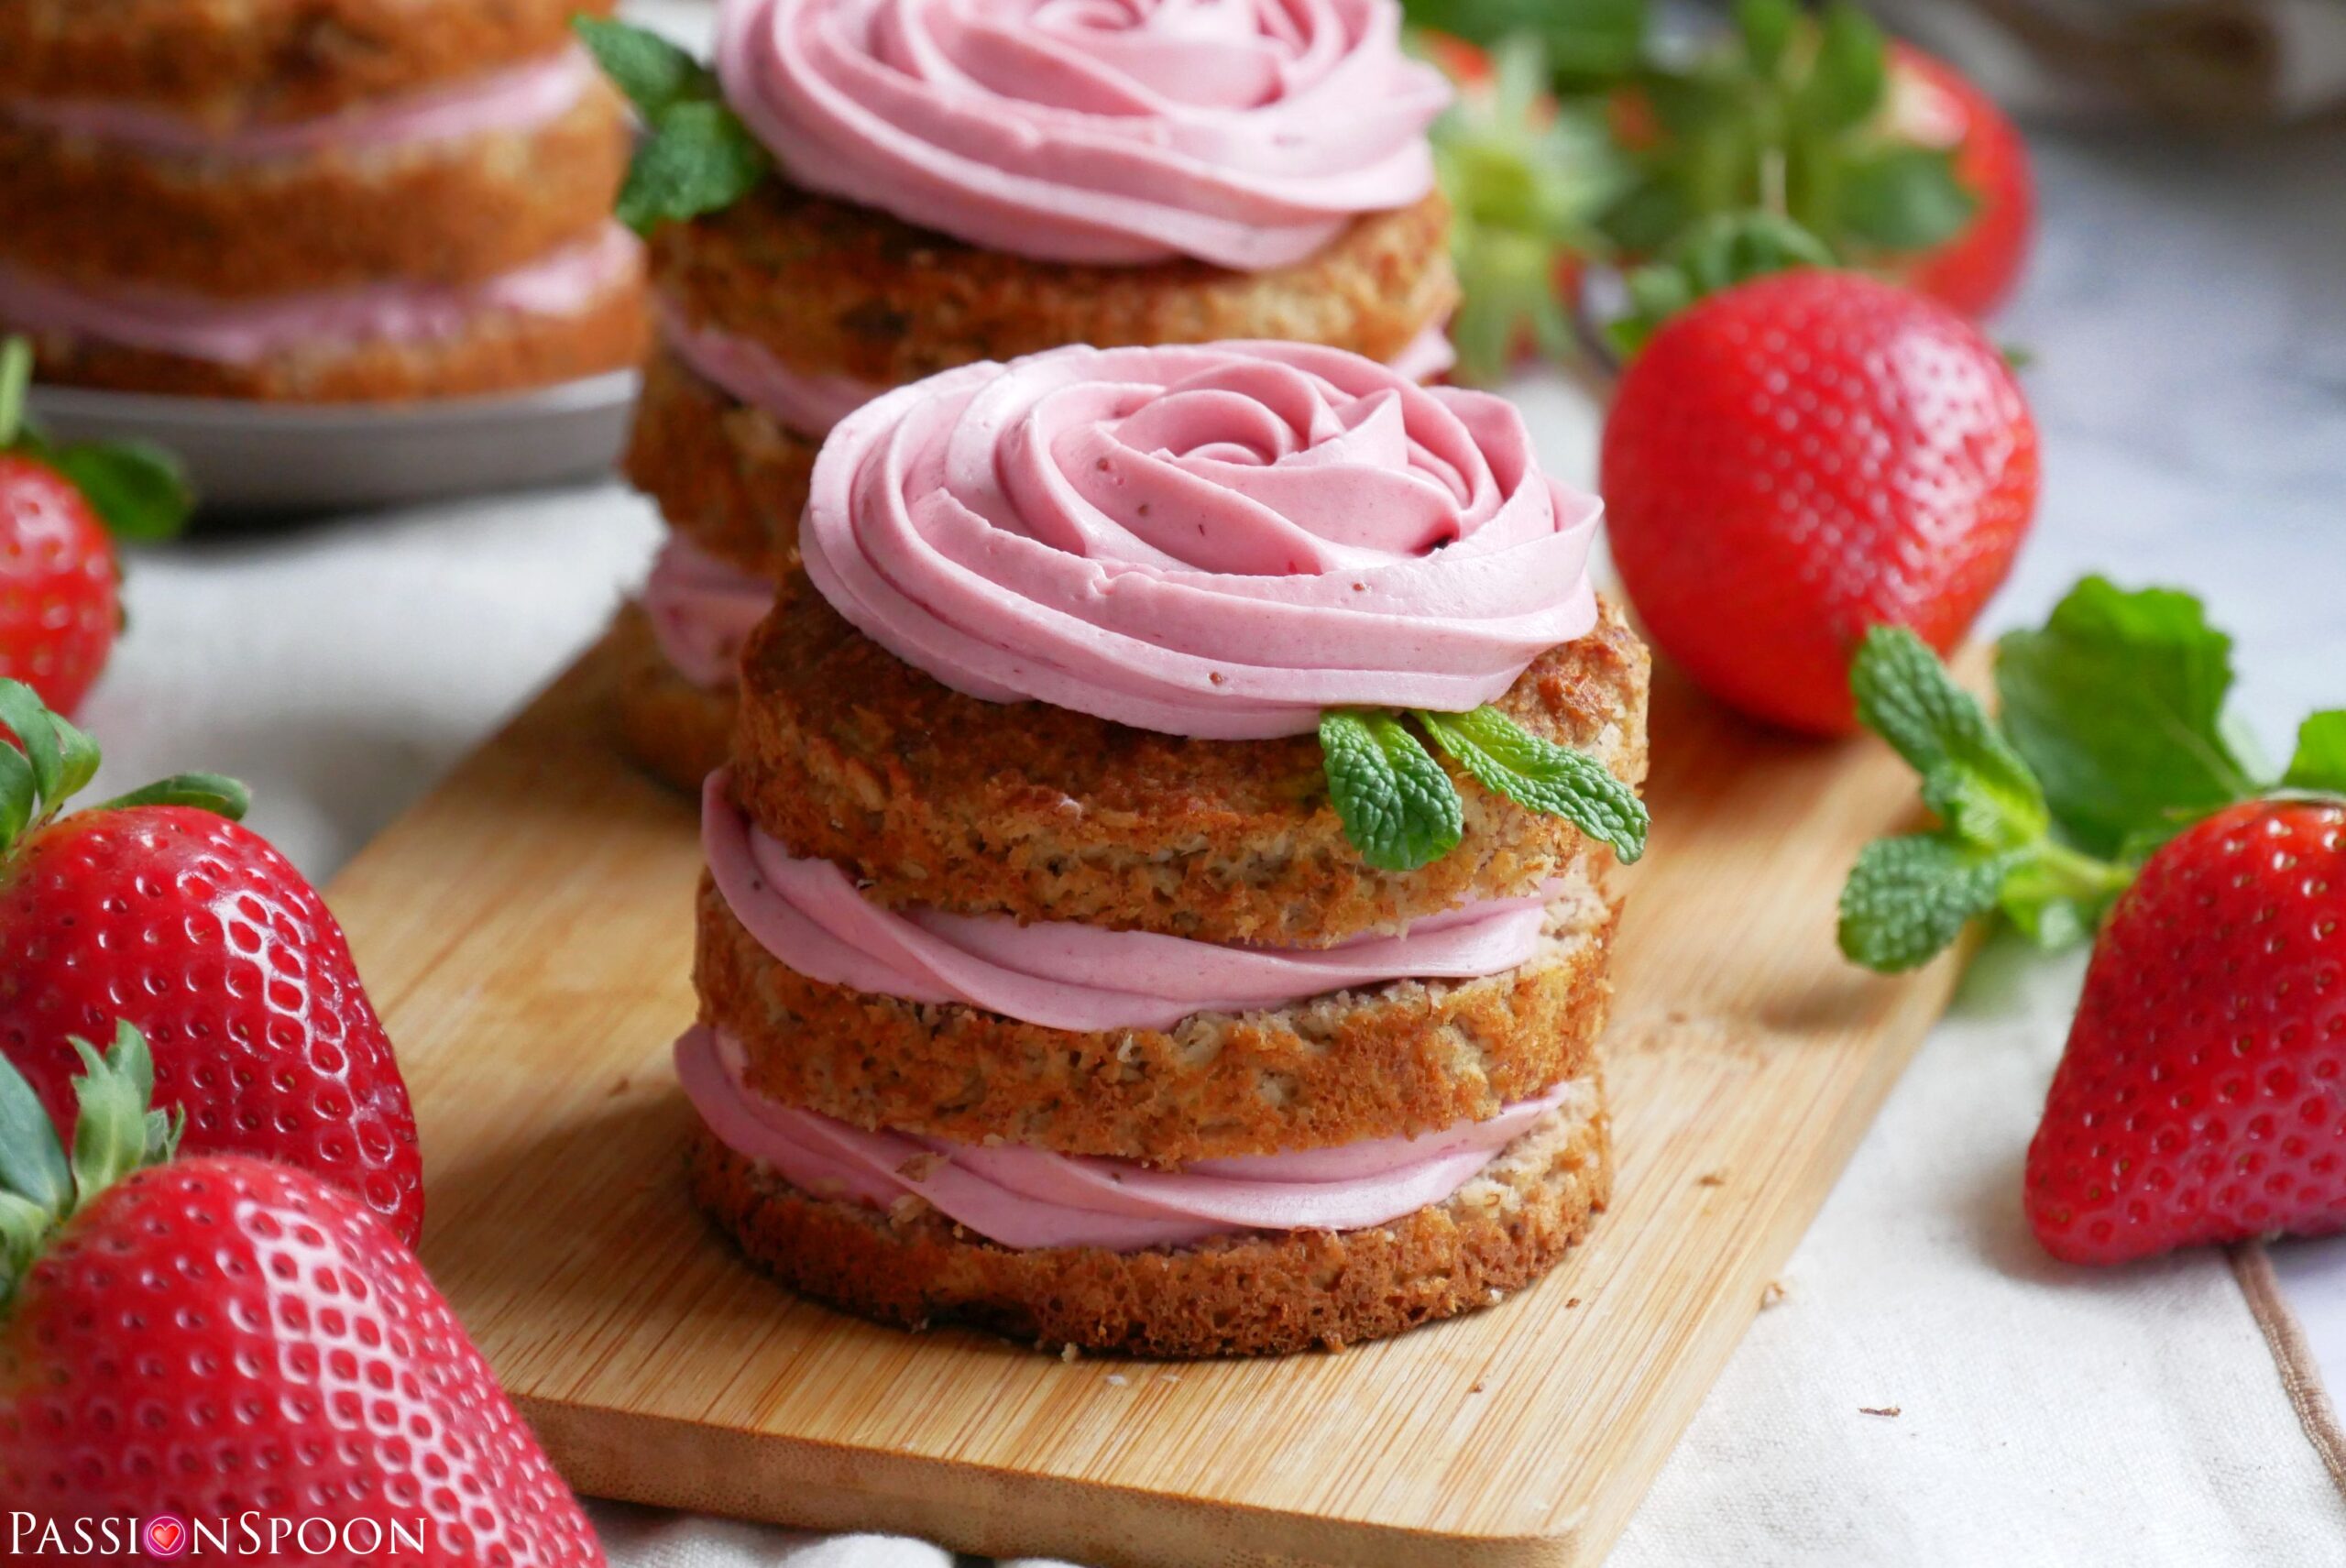 https://passionspoon.com/wp-content/uploads/2023/02/strawberry-buttercream-banana-coconut-cake-scaled.jpg